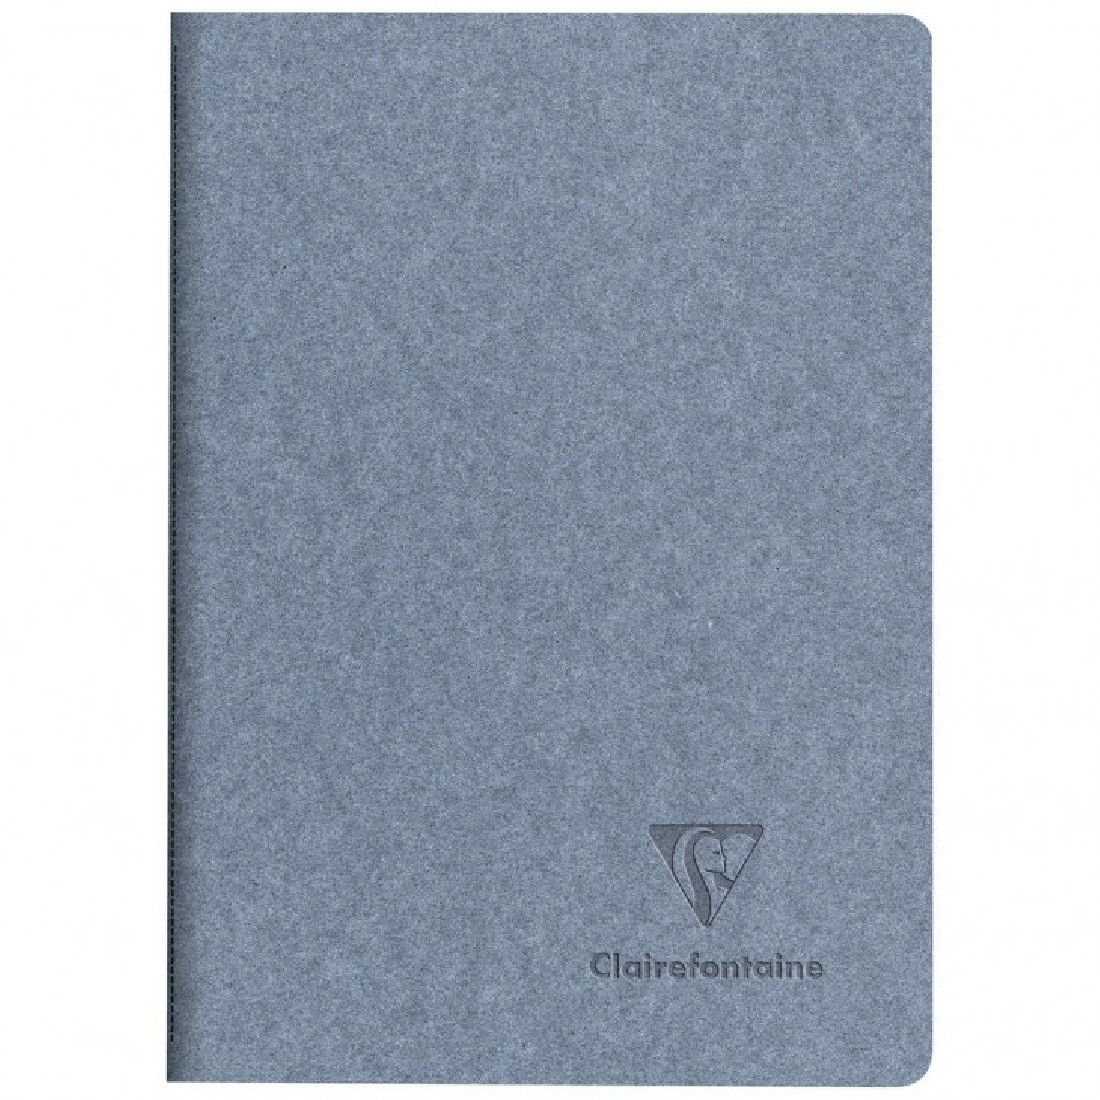 Clairefontaine Rhodia Jeans notebook A6 10,5x14,8cm, 90gr, lined, 96 pages, 083517